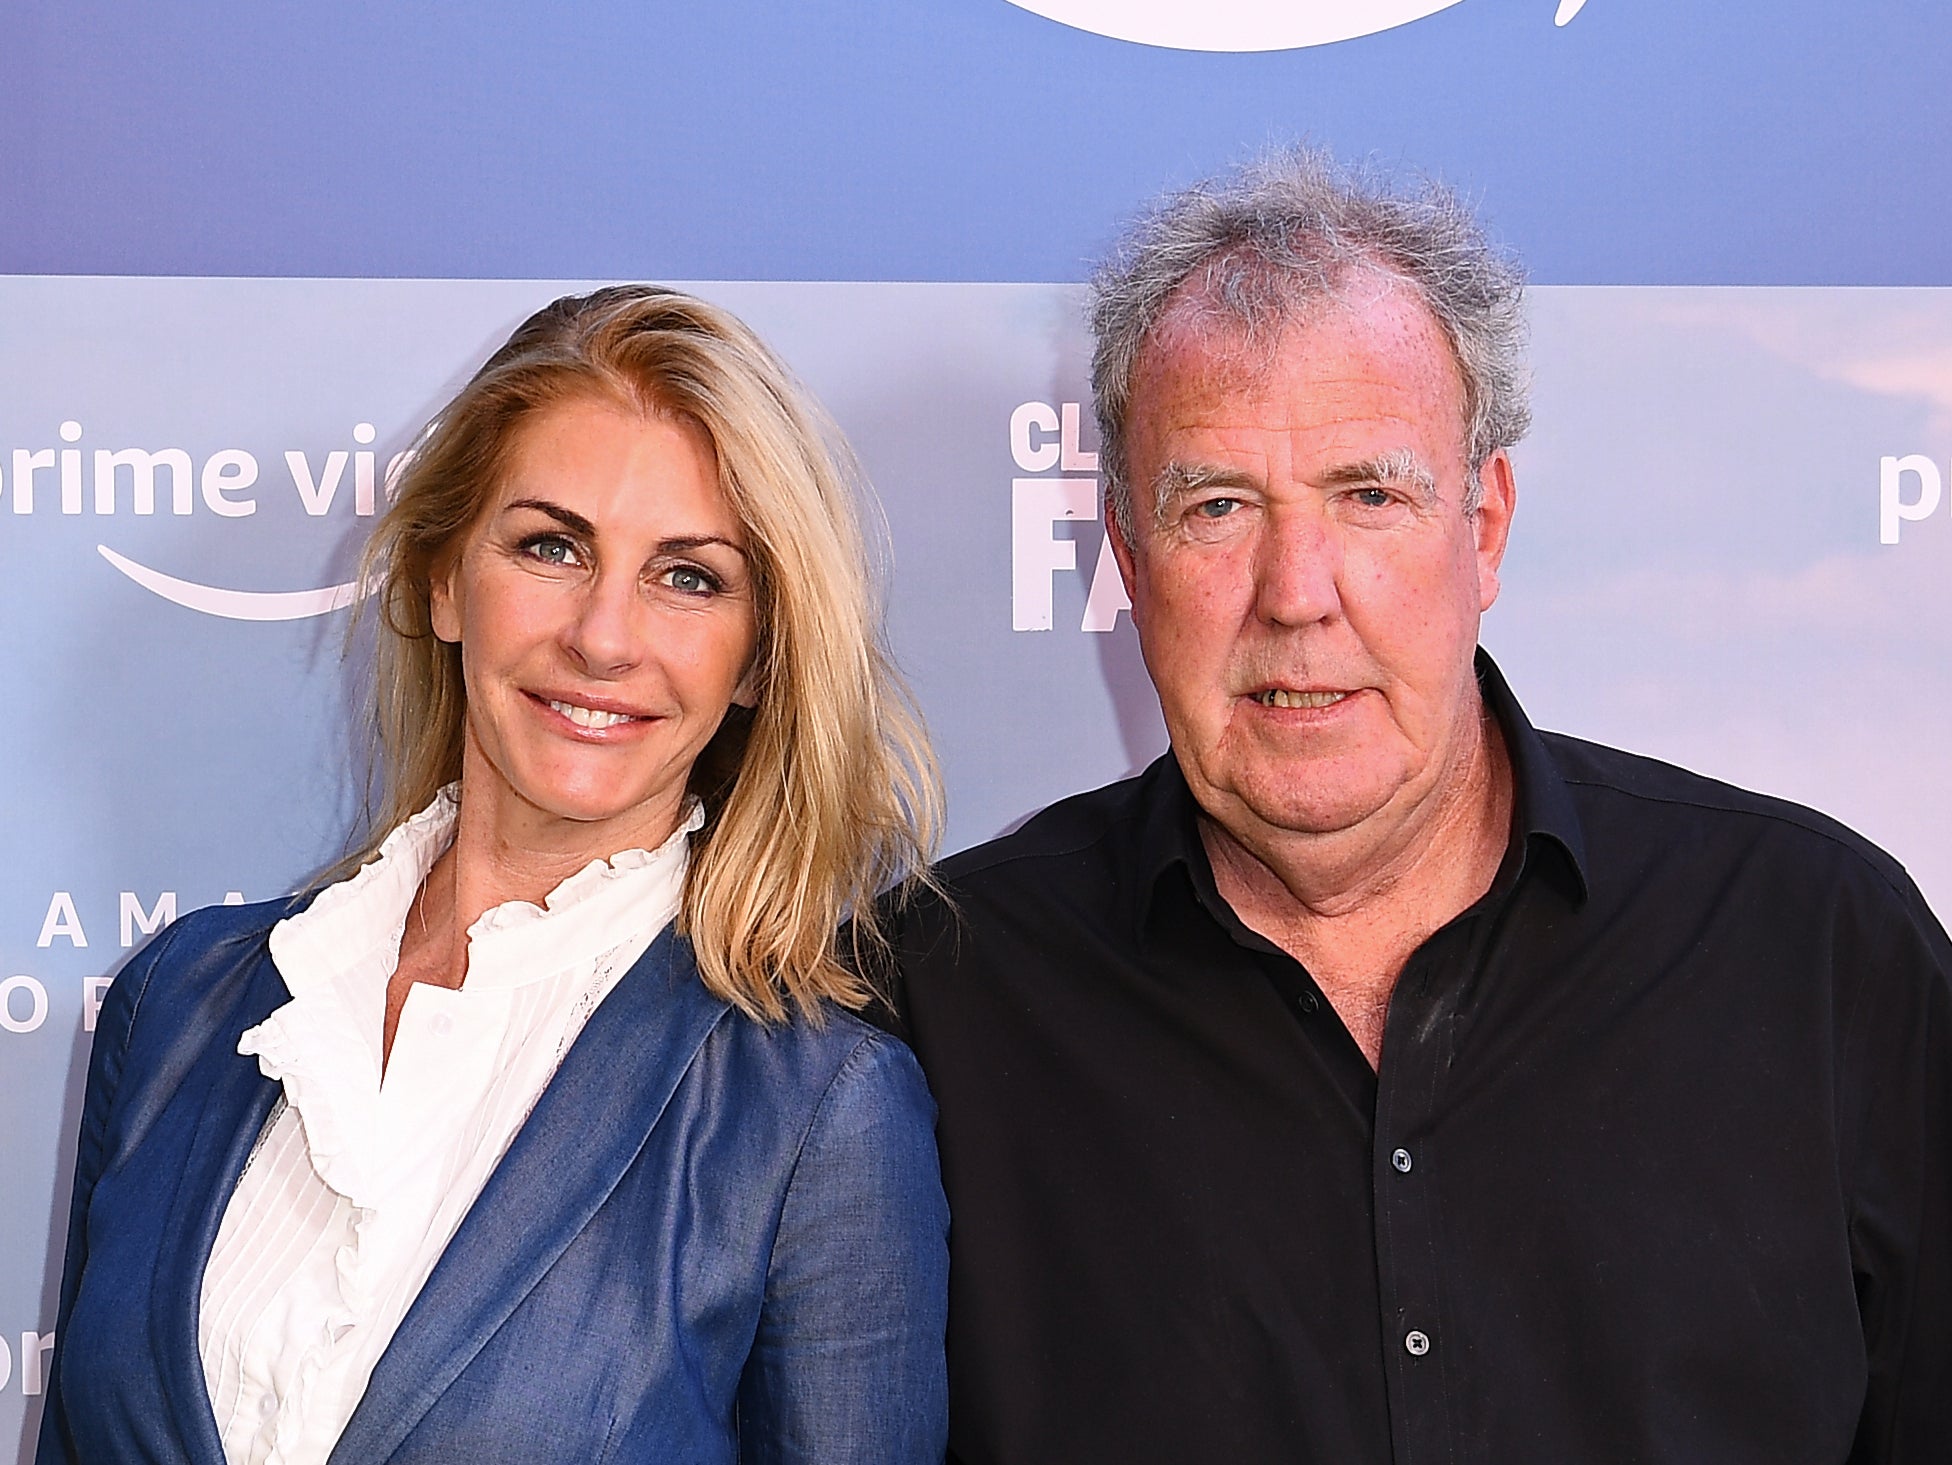 Lisa Hogan and Jeremy Clarkson have been dating since 2017